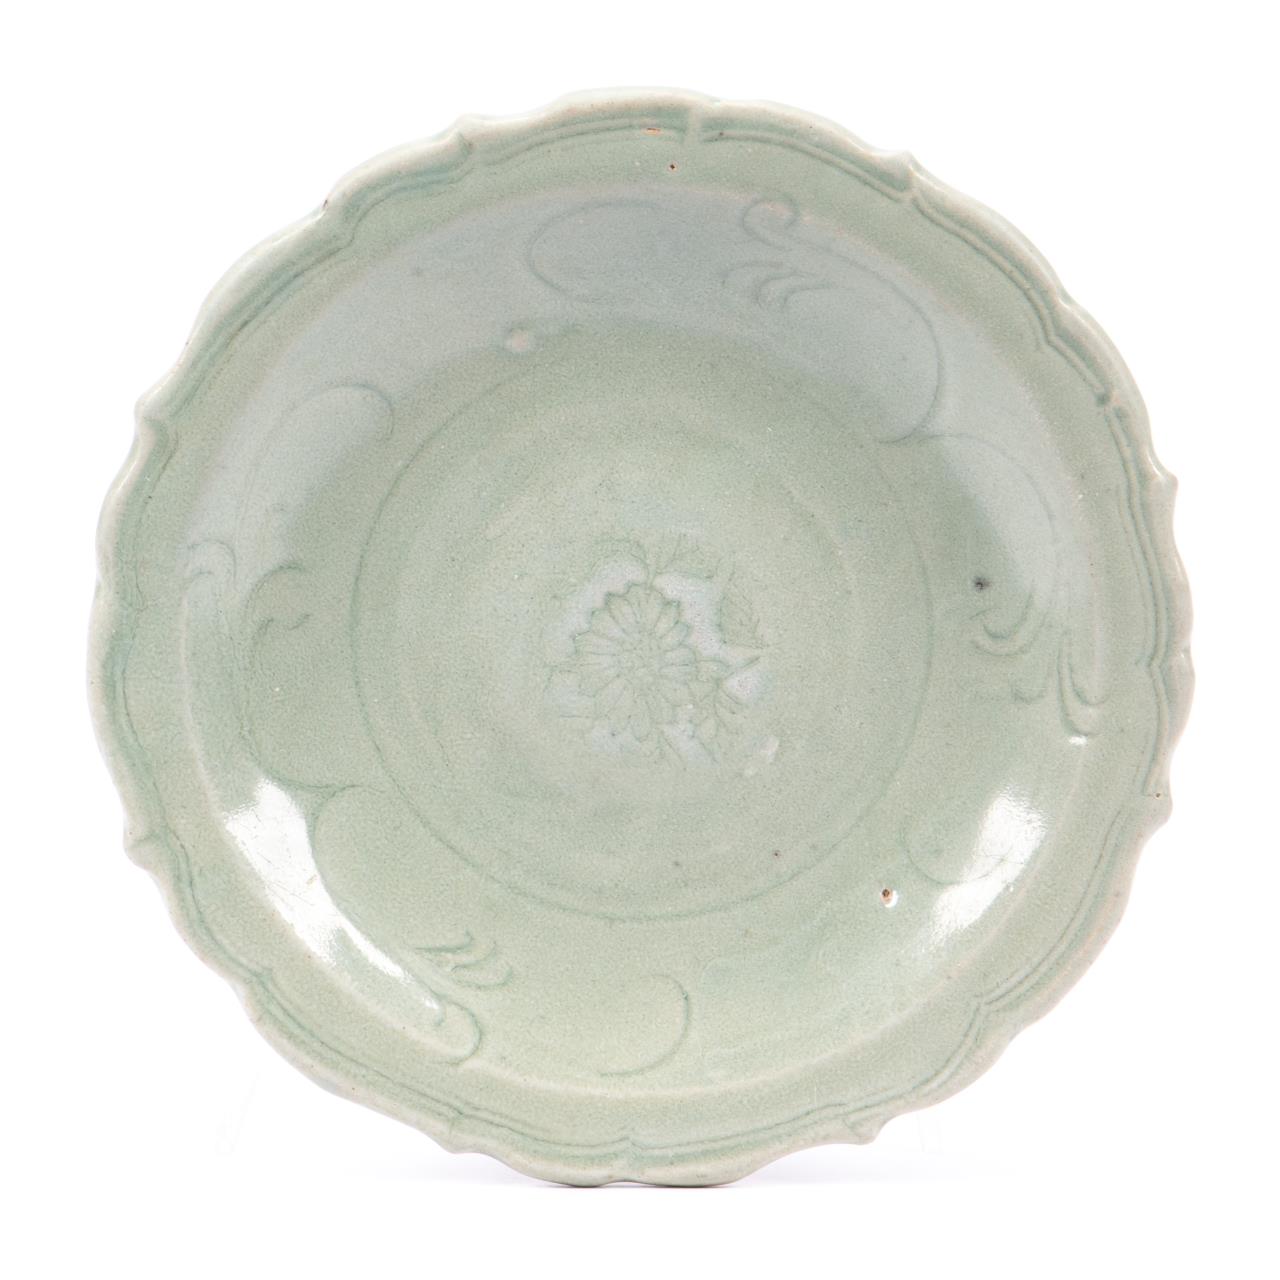 CHINESE CELADON GLAZED FLORAL LOW 35d7b8